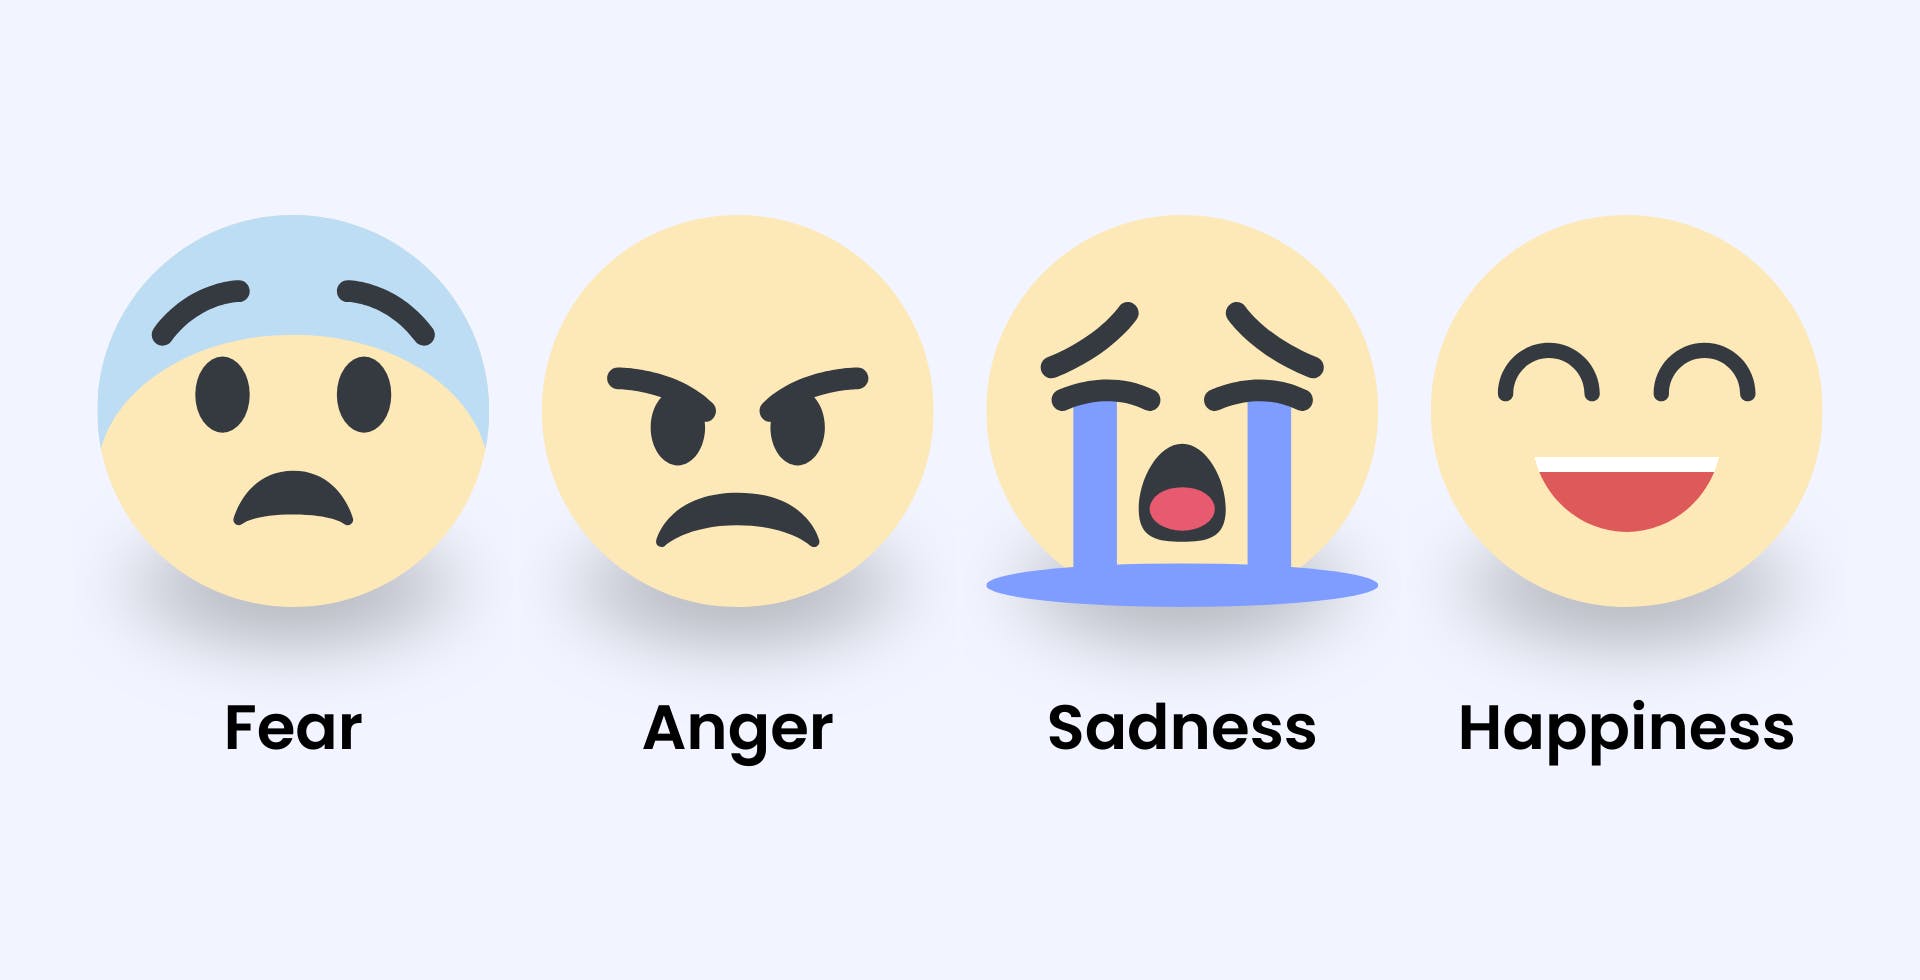  Image highlights the primary emotions of fear, anger, sadness, and happiness with emoji representing each feeling